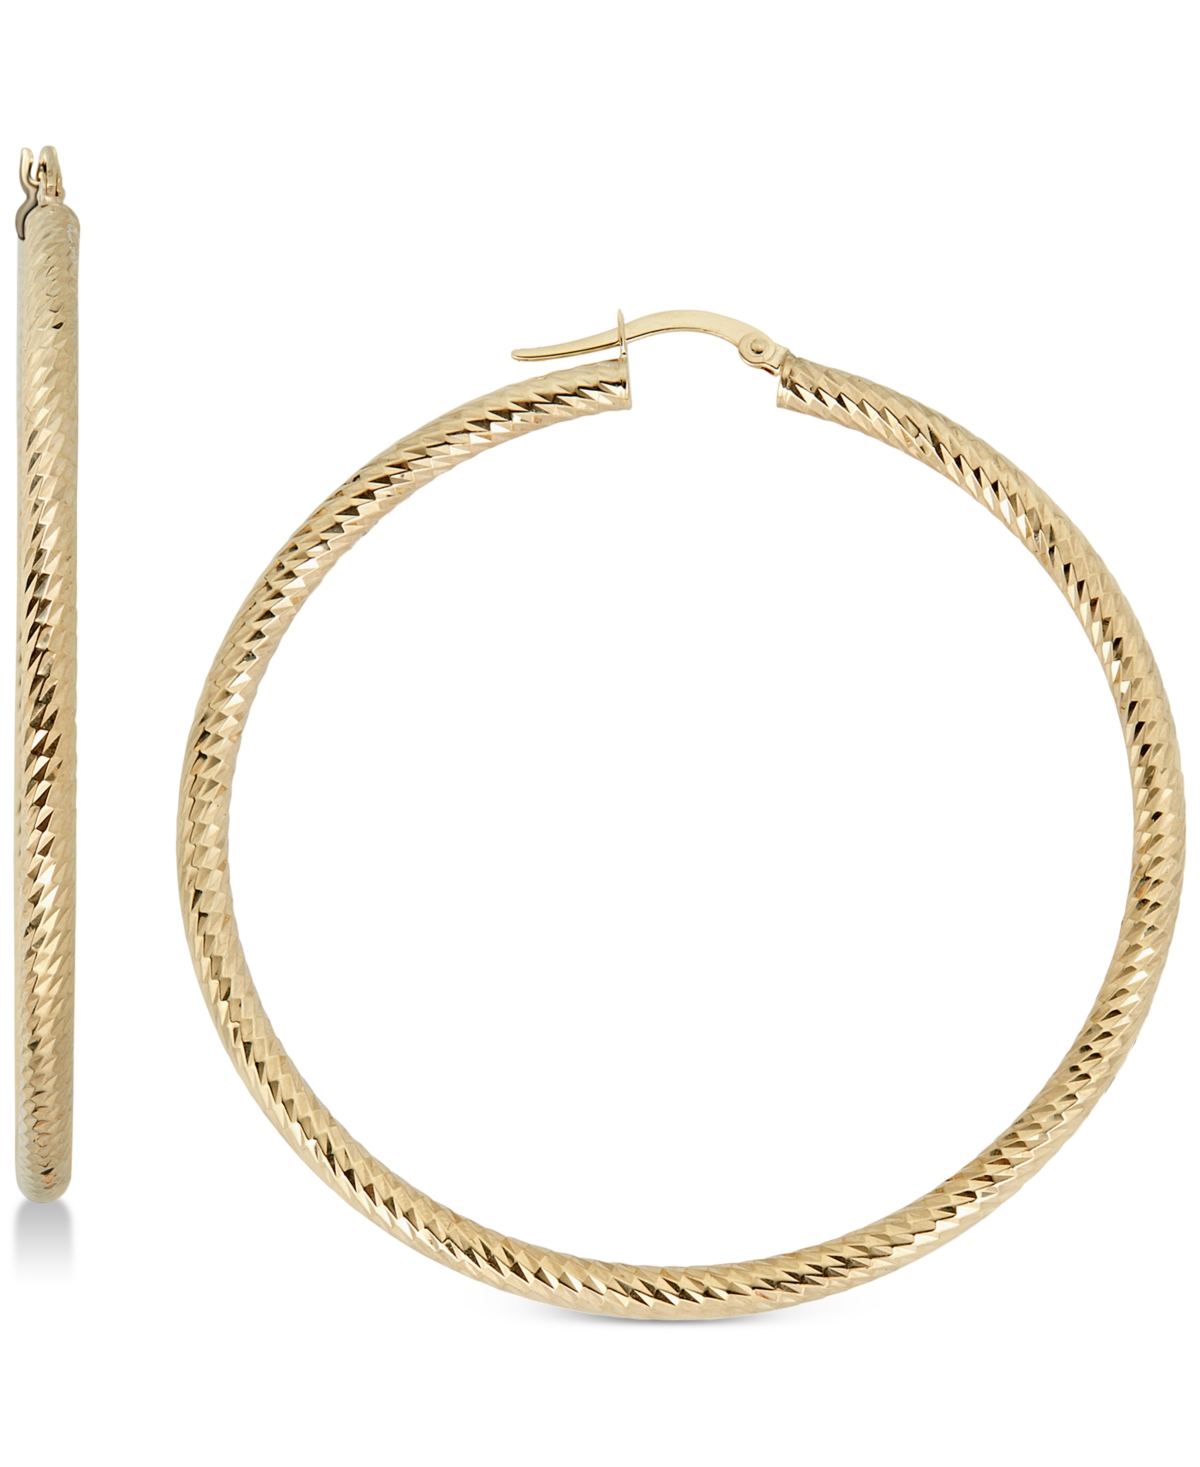 Textured Hoop Earrings in 14k Gold, 50mm, Made in Italy - Yellow Gold